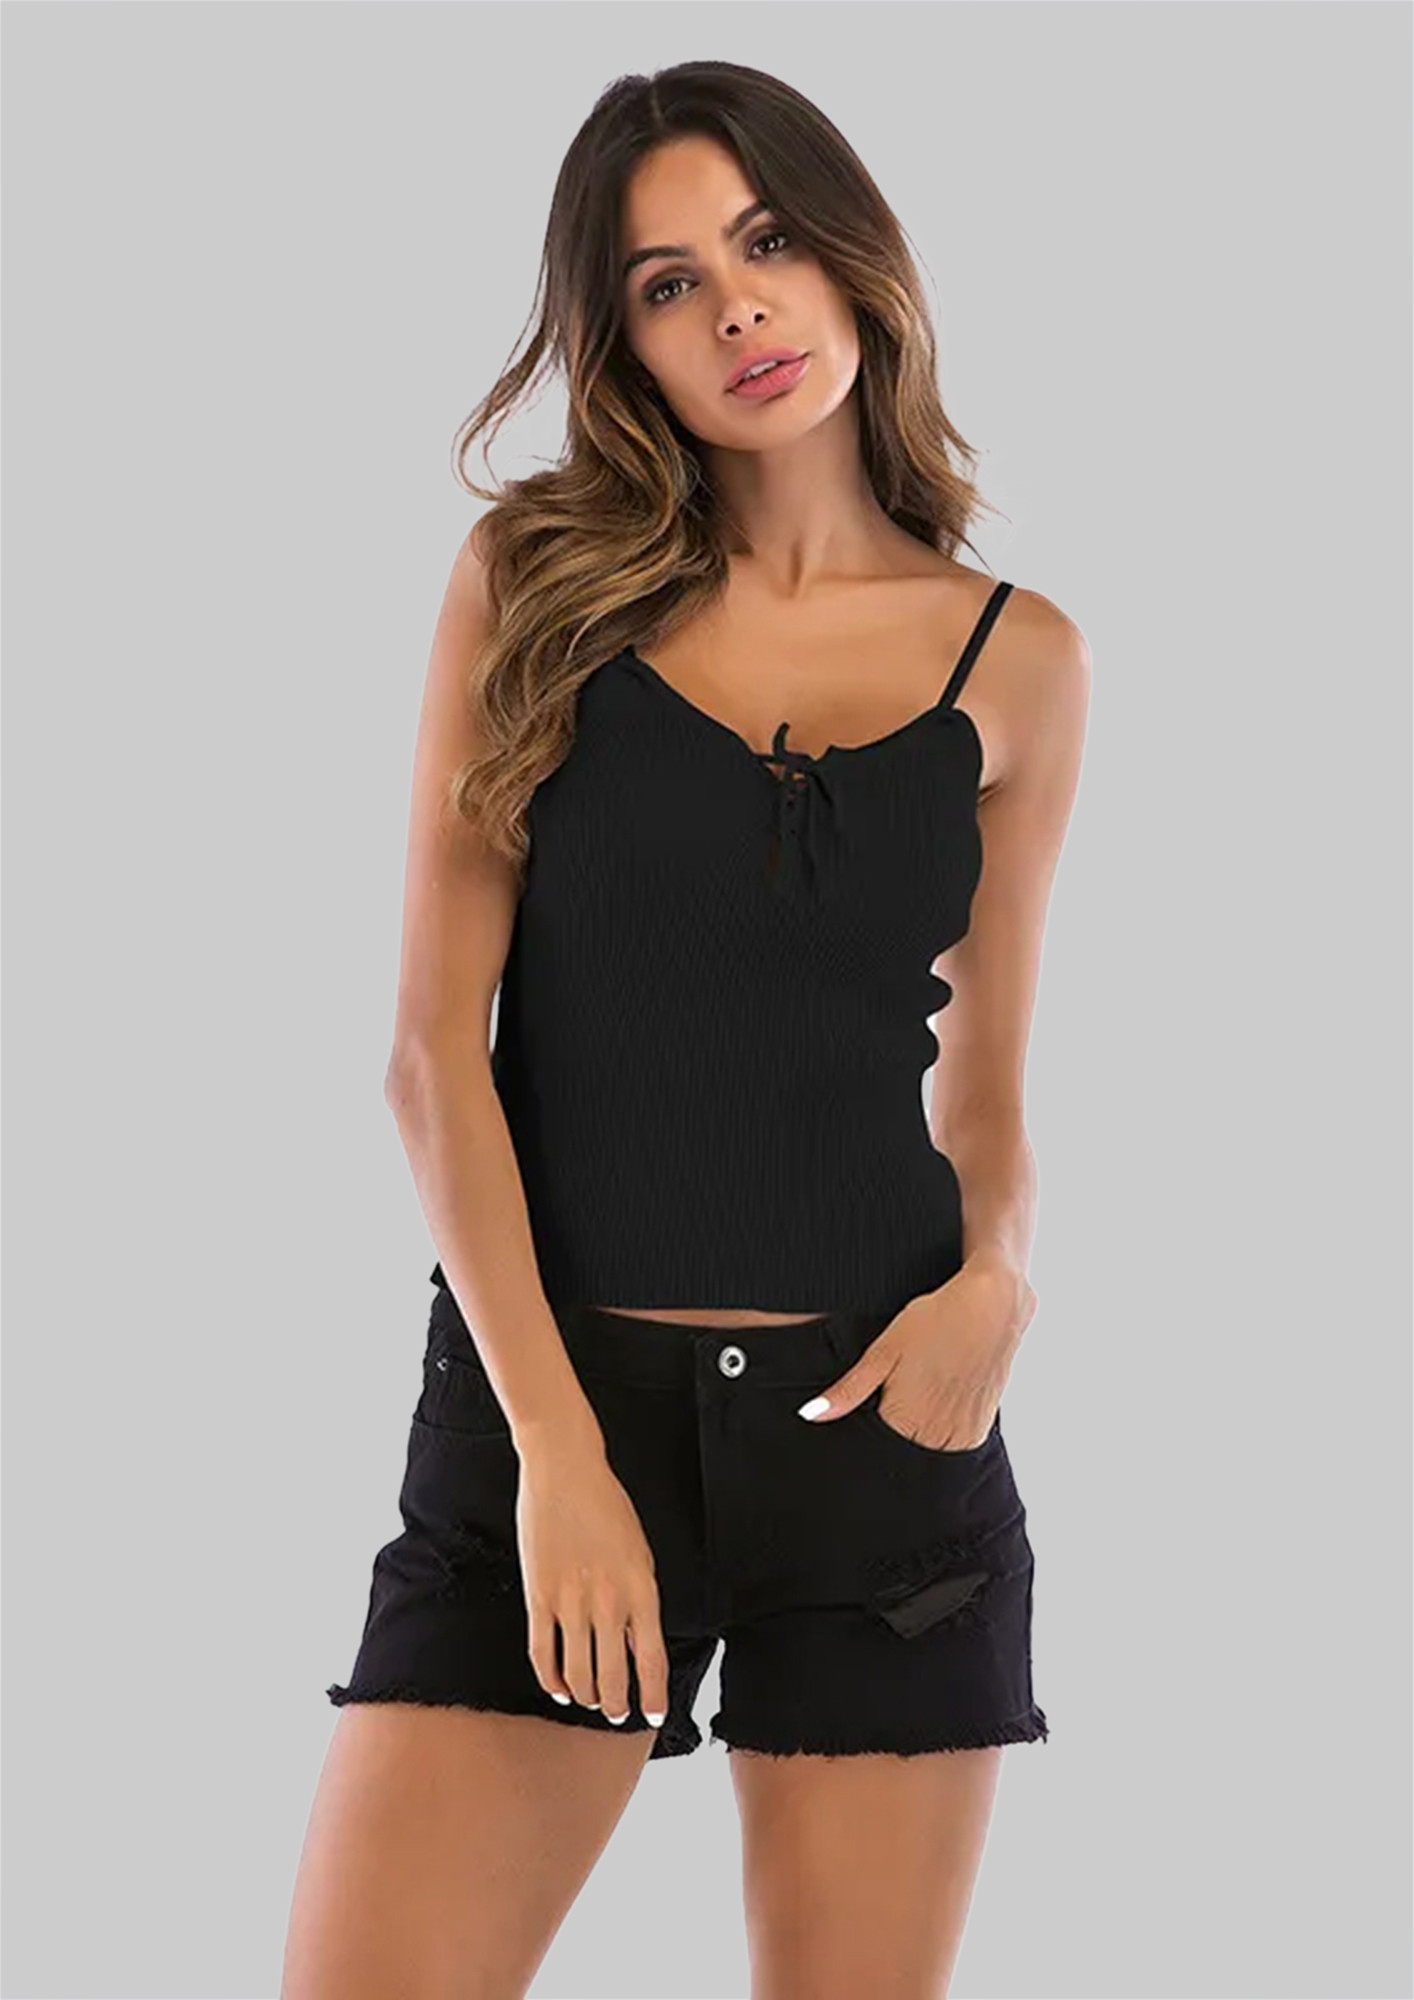 STRAPPY FRONT-TIE DETAIL SOLID BLACK CAMI